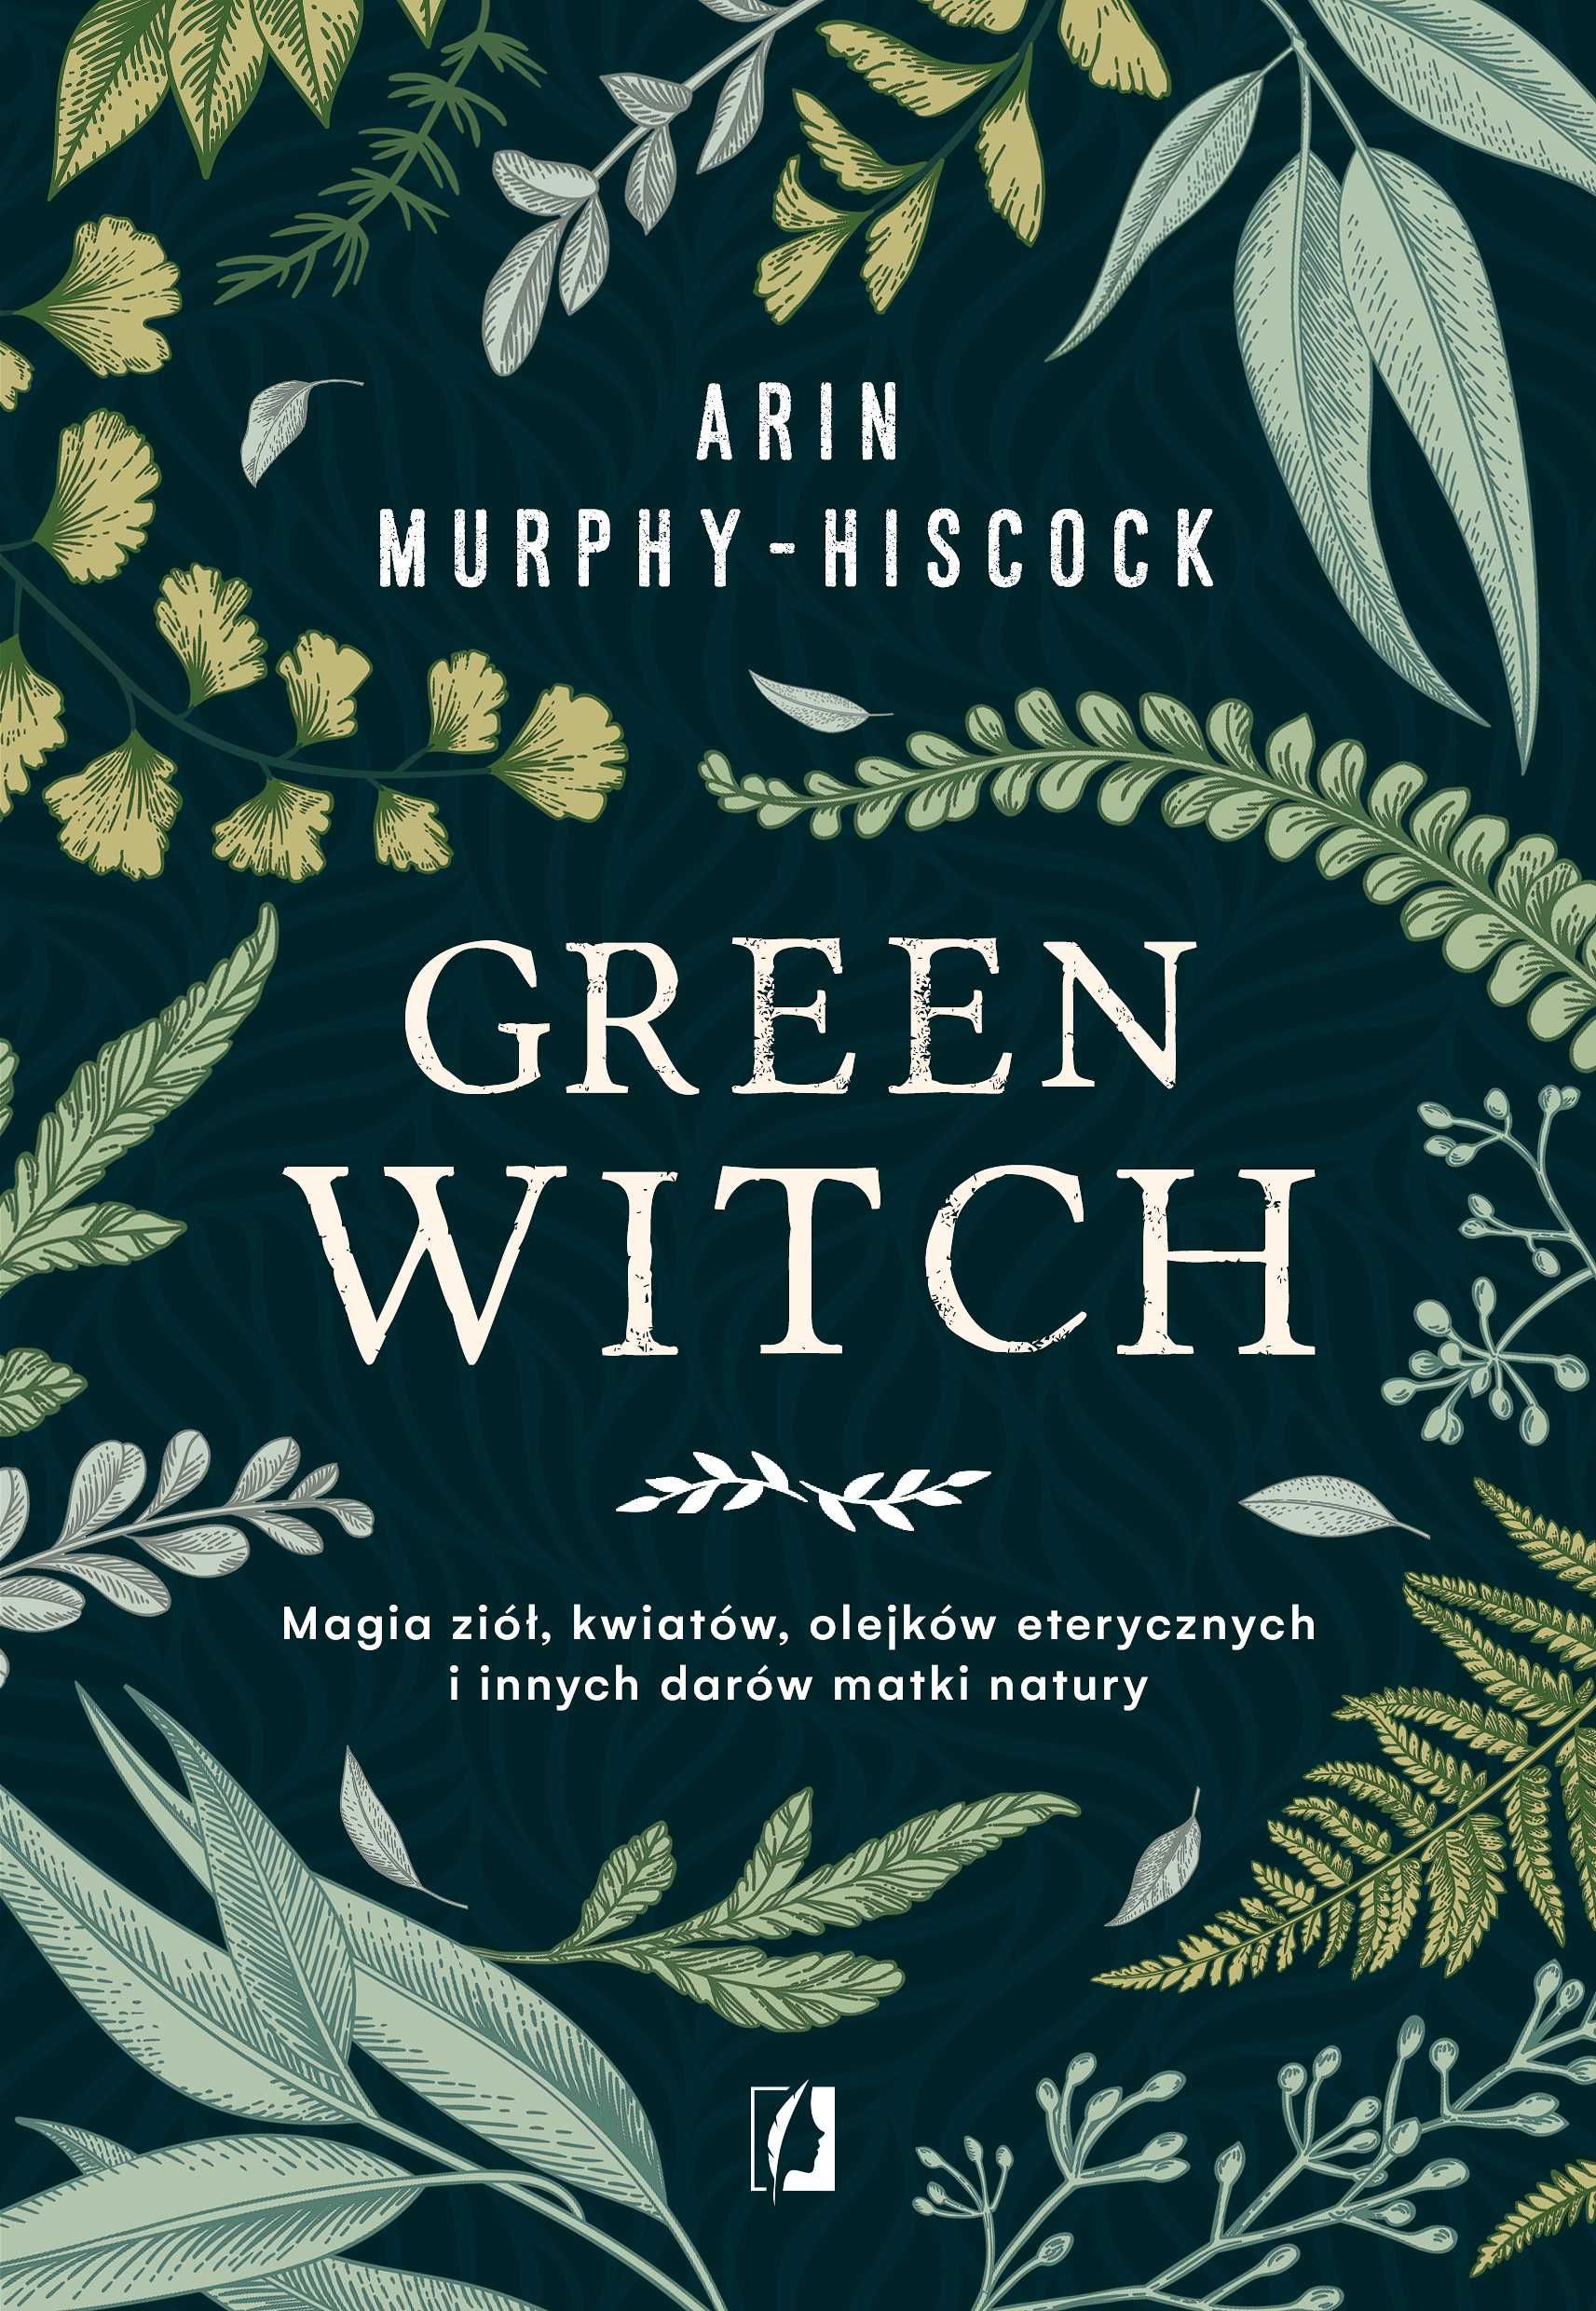 Green Witch
Autor: Arin Murphy-Hiscock